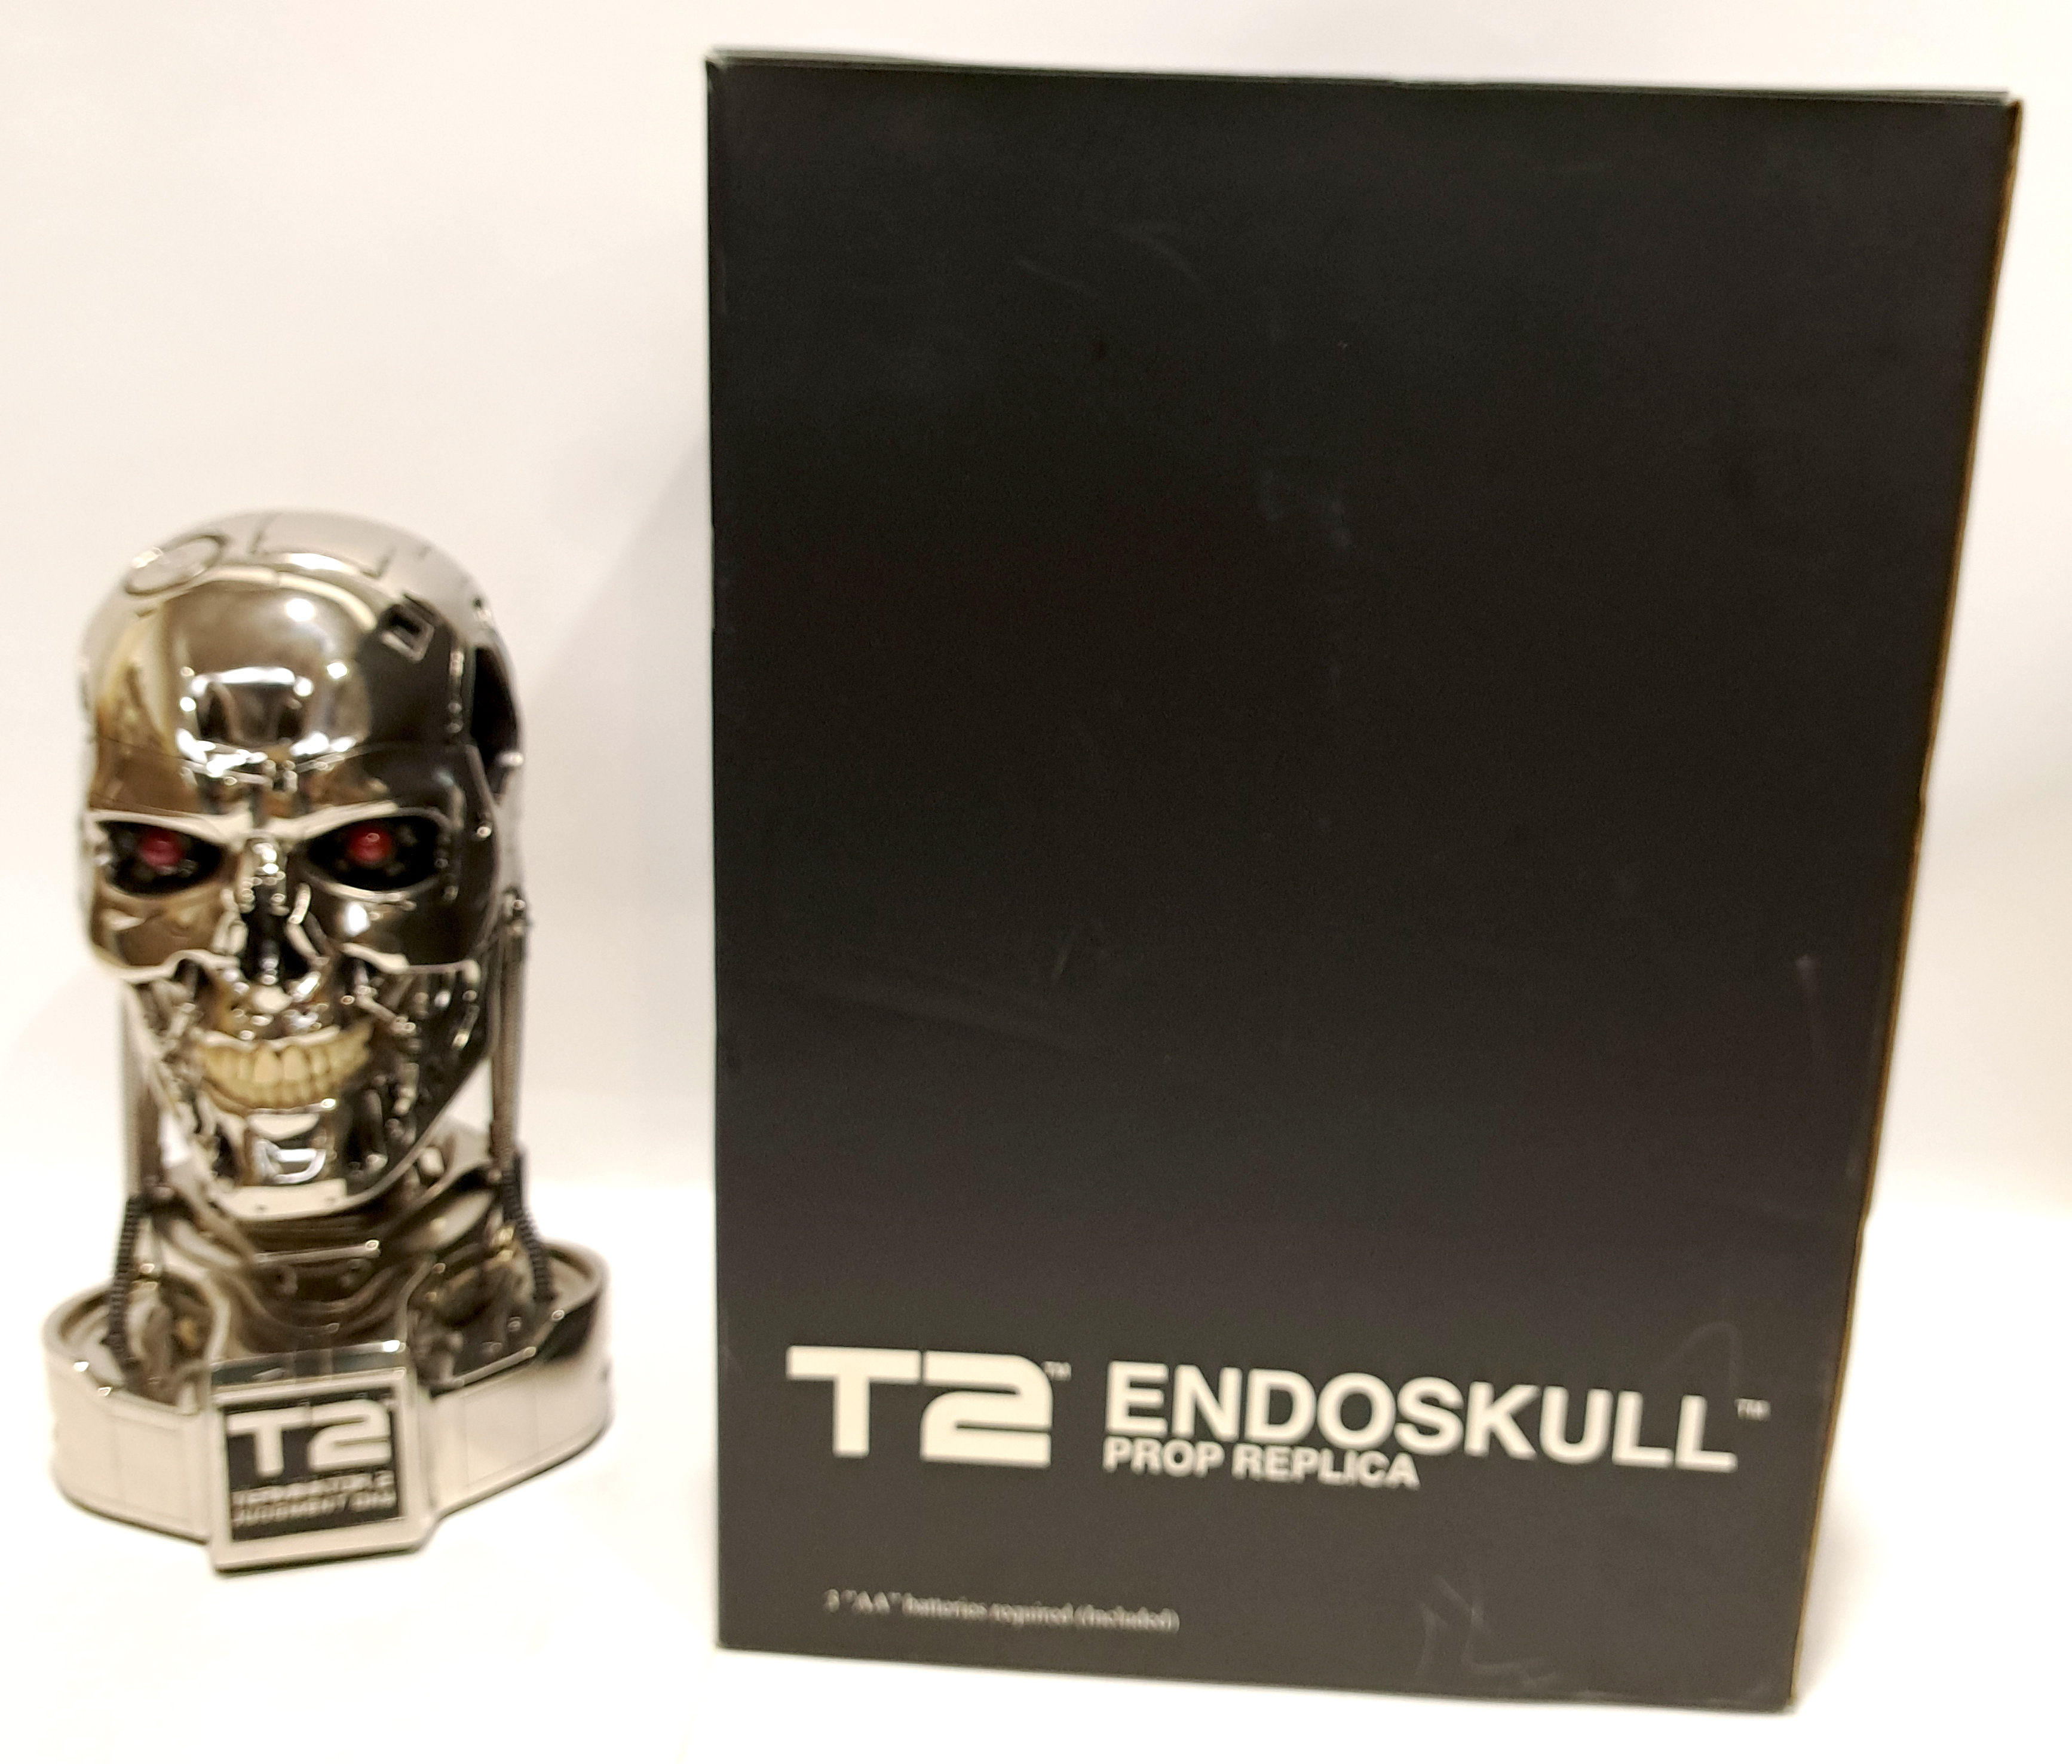 Hollywood Collector Gallery Terminator 2 Judgement Day Endo Skull mini bust